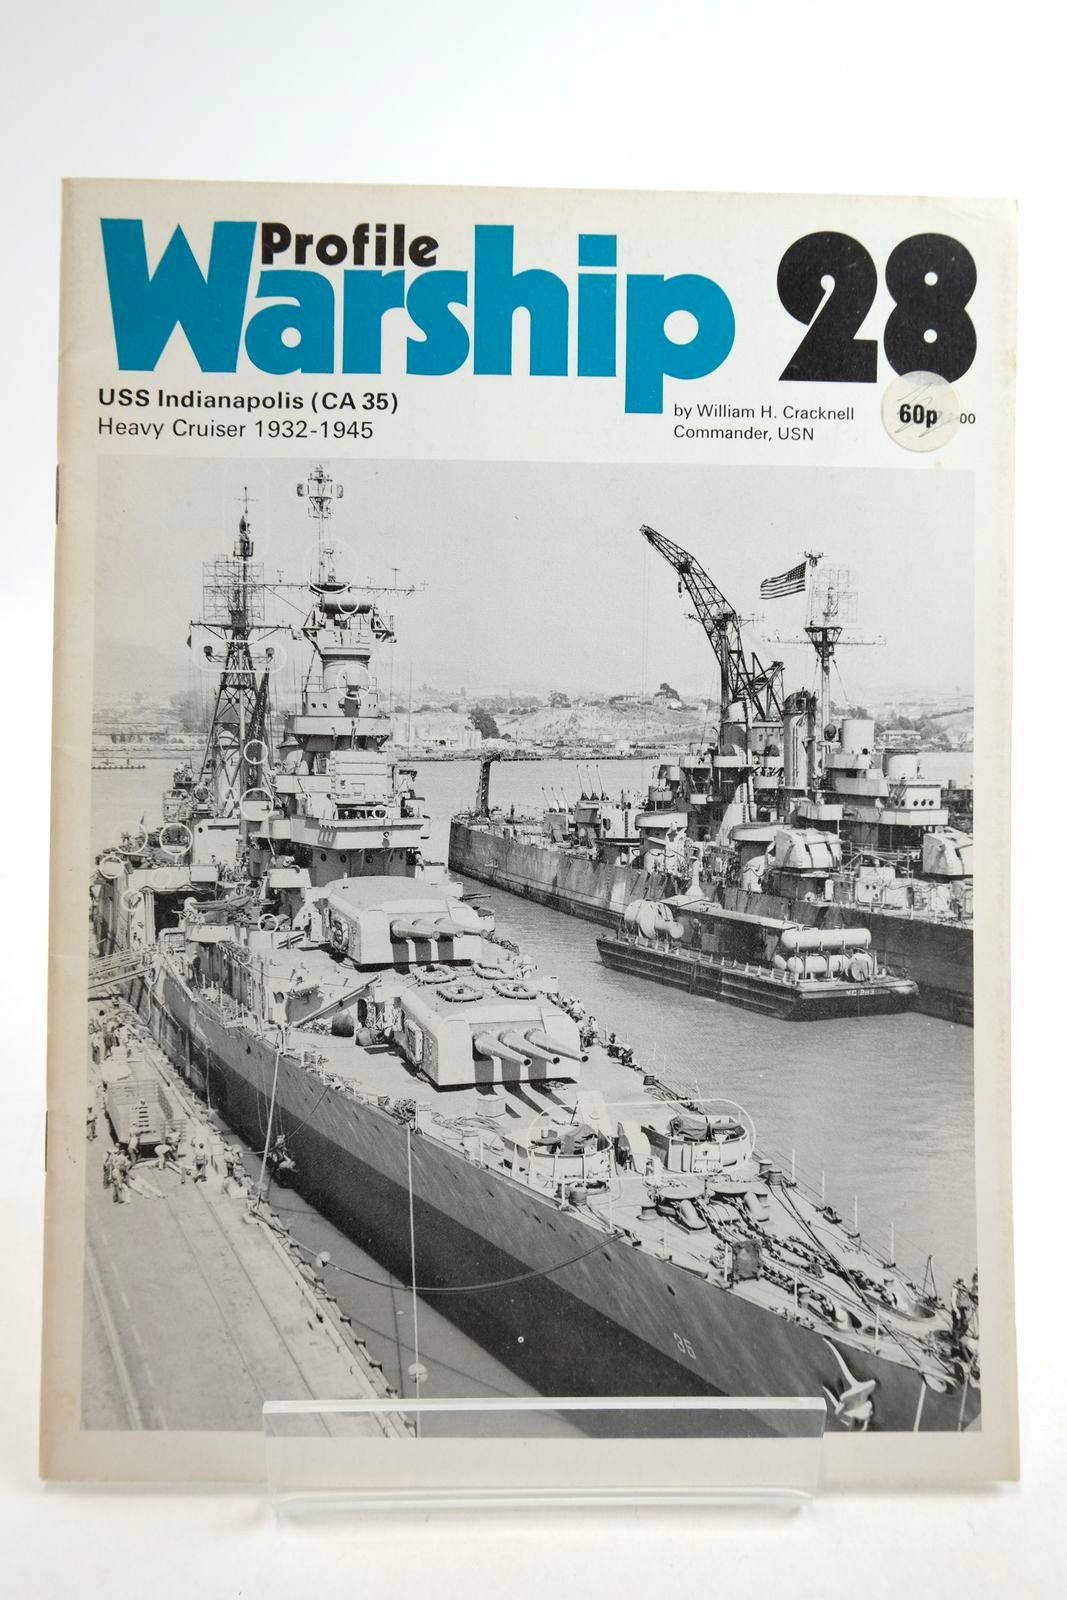 Photo of PROFILE WARSHIP 28: USS INDIANAPOLIS (CA 35) HEAVY CRUISER 1932-1945 written by Cracknell, William H. published by Profile Publications (STOCK CODE: 2134913)  for sale by Stella & Rose's Books